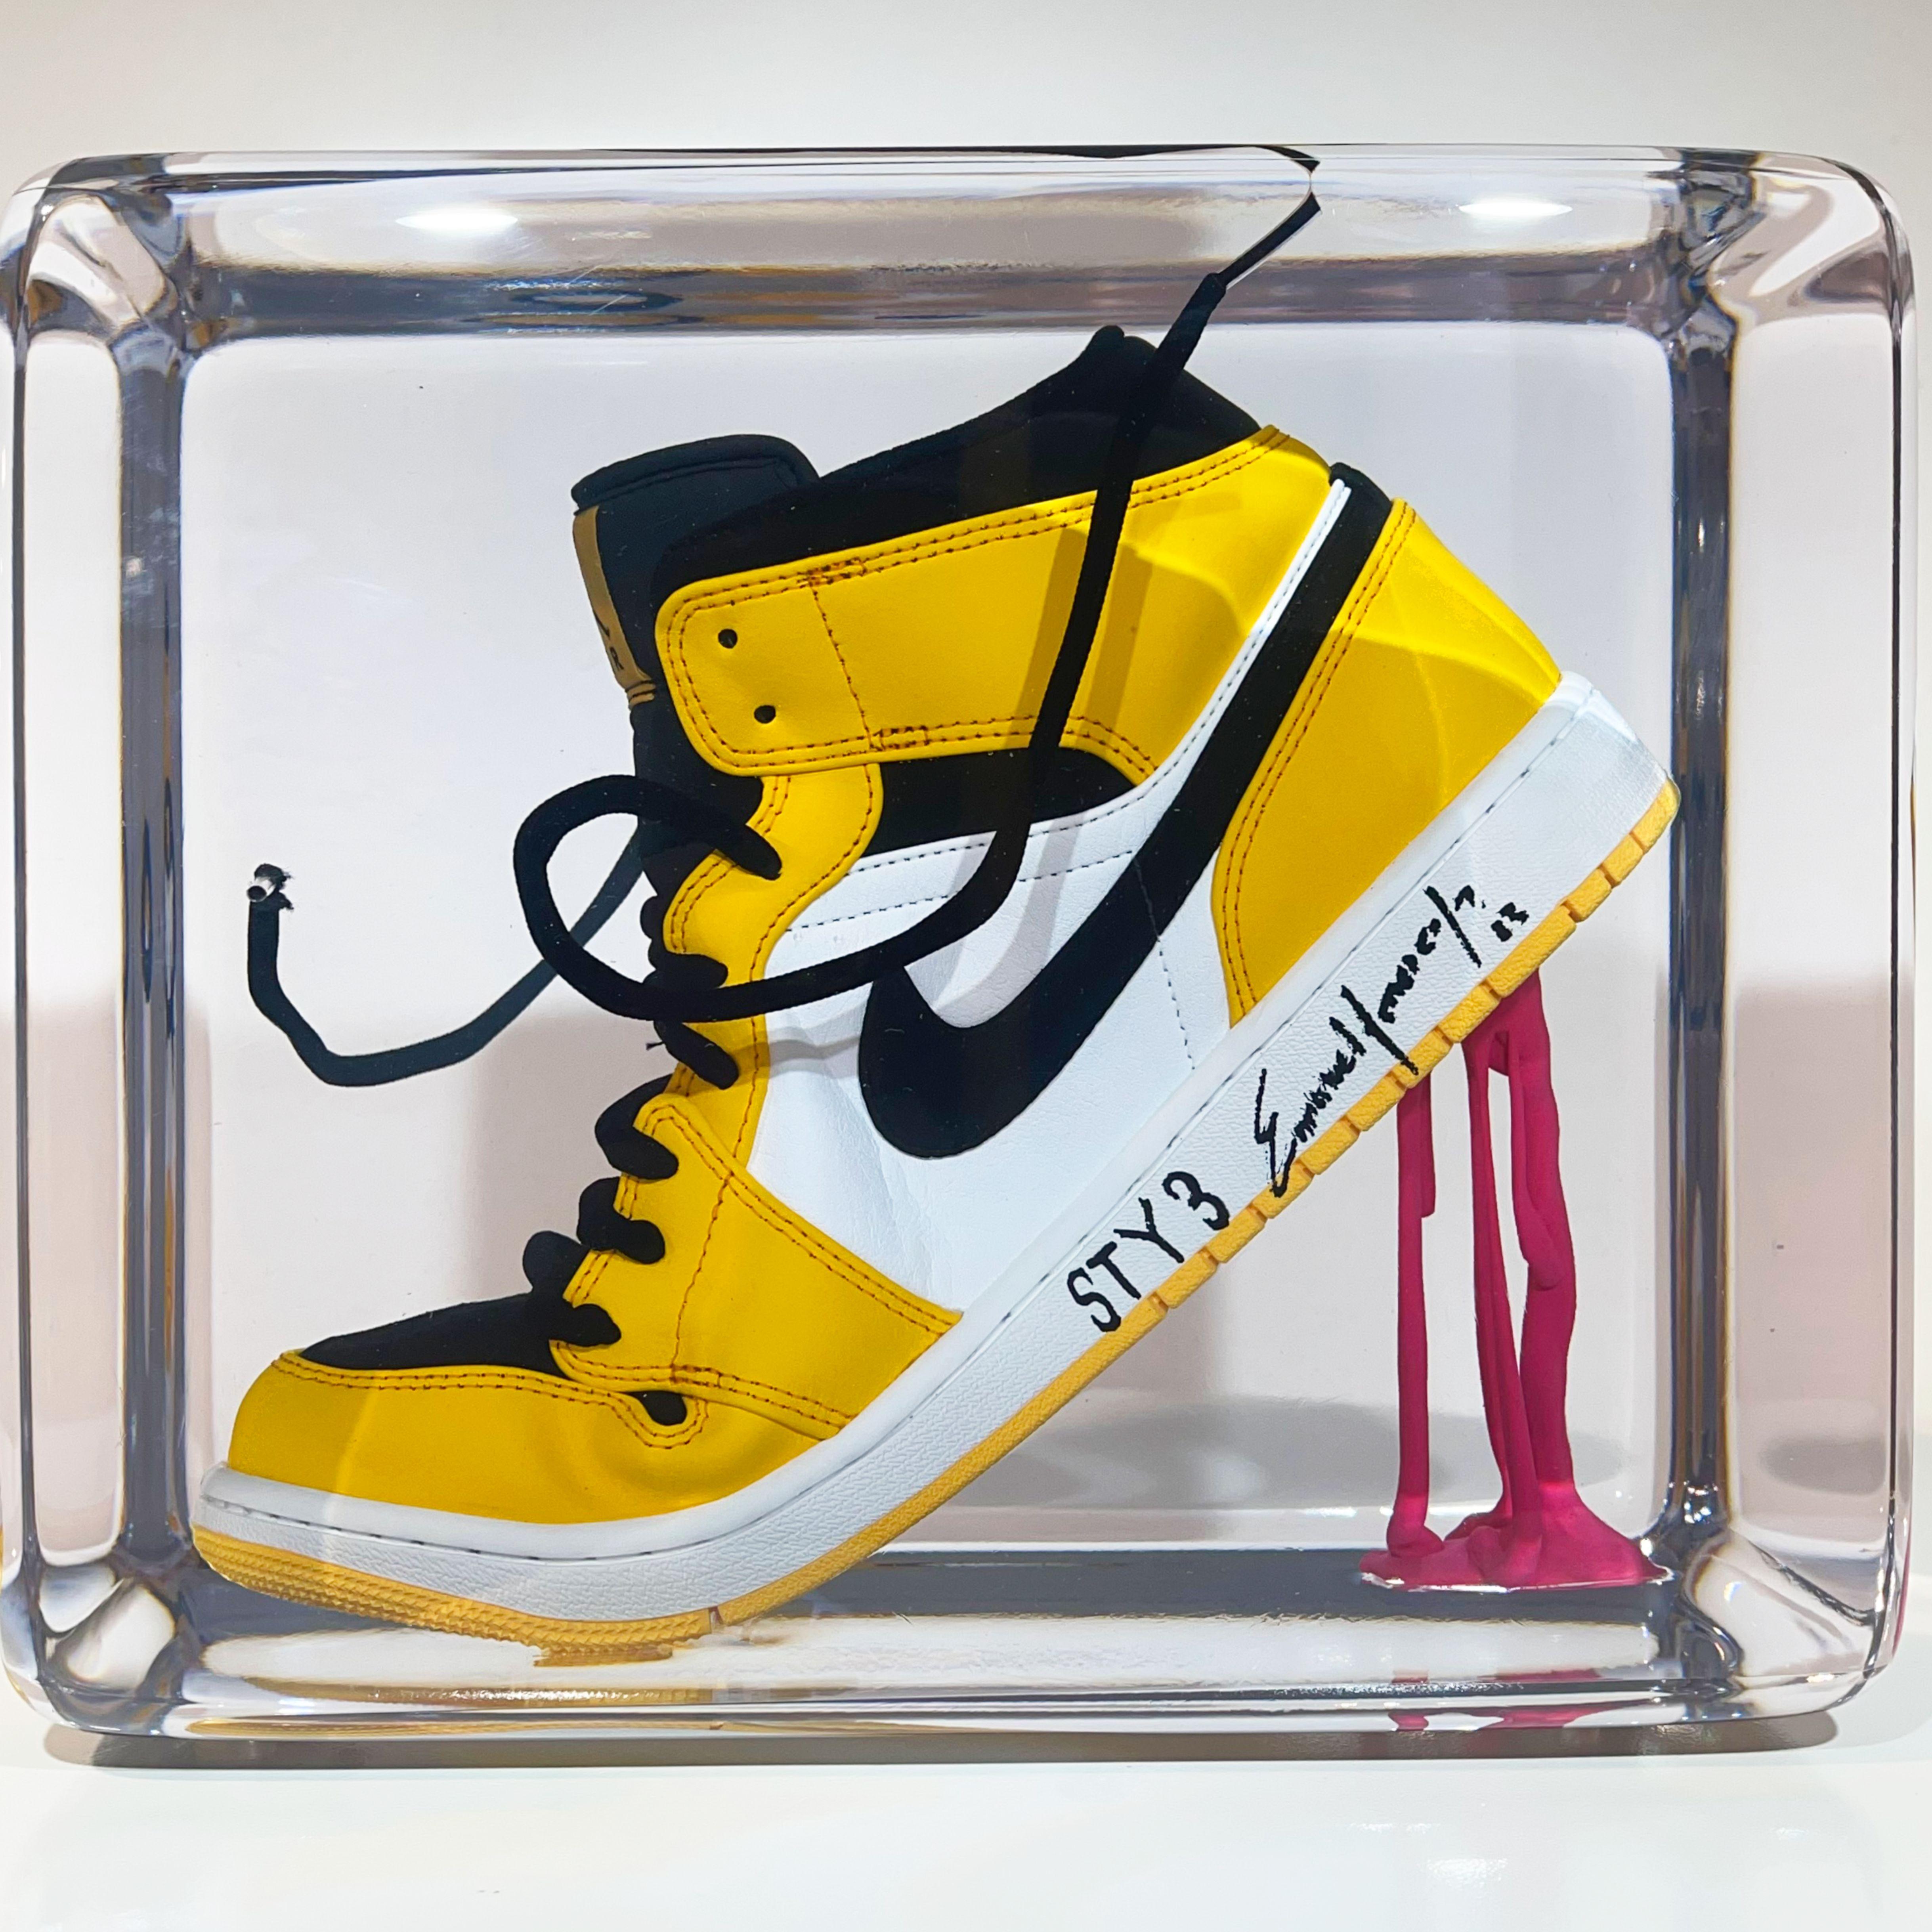 Sneakers & Gum Taxi Yellow tone Sculpture Edition 03/20 For Sale 2